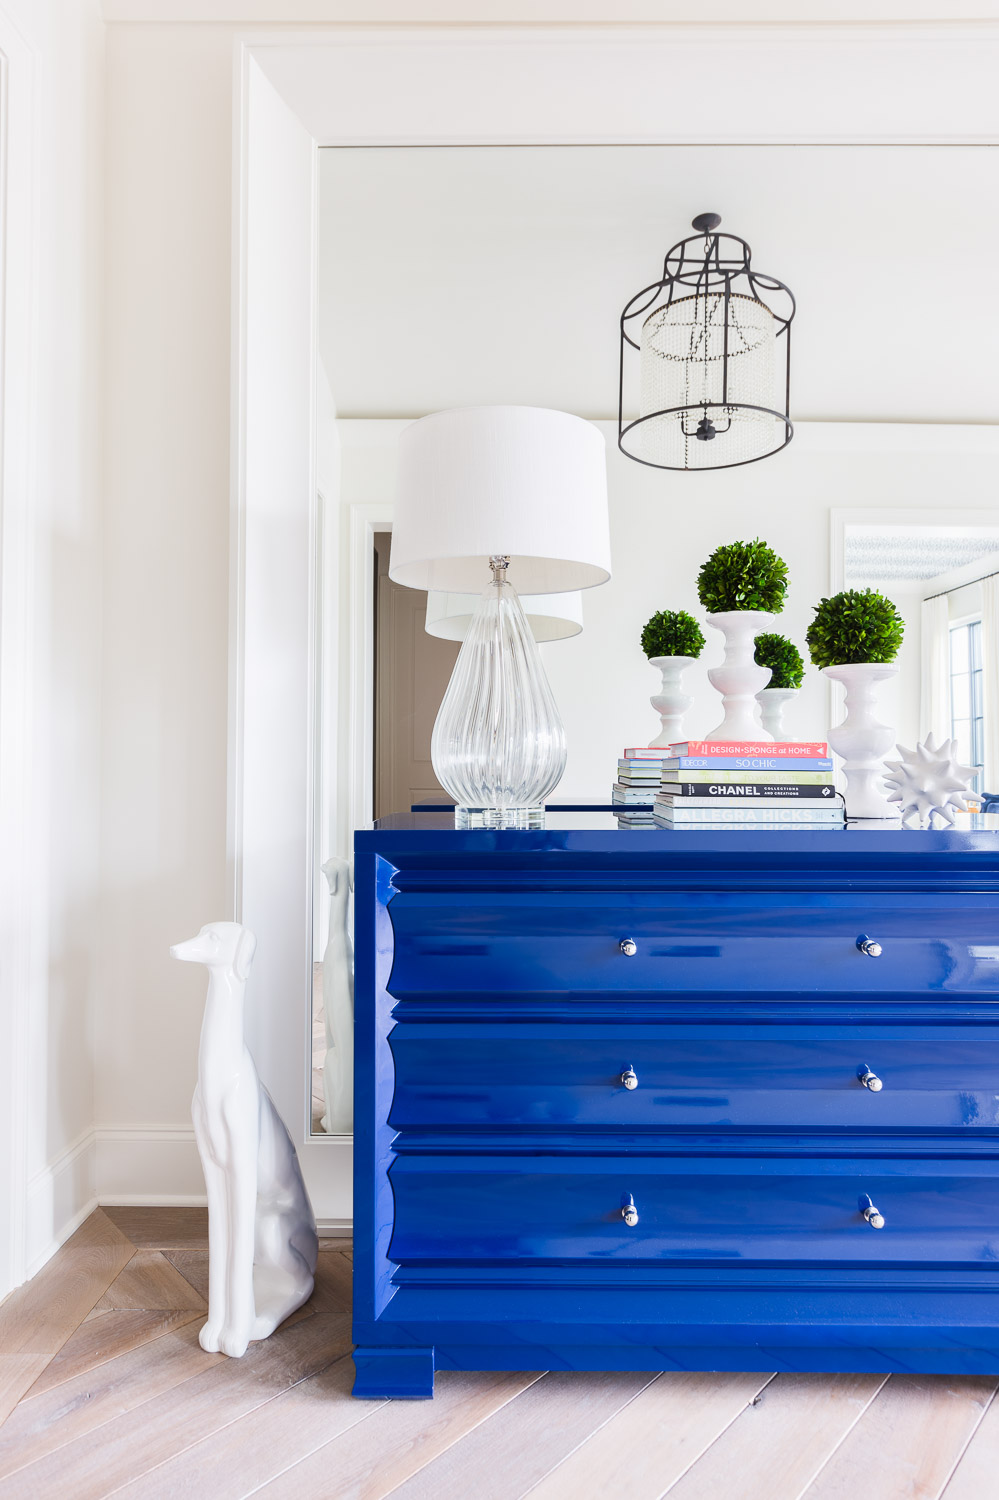 House Beautiful: In the BLUE ROOM